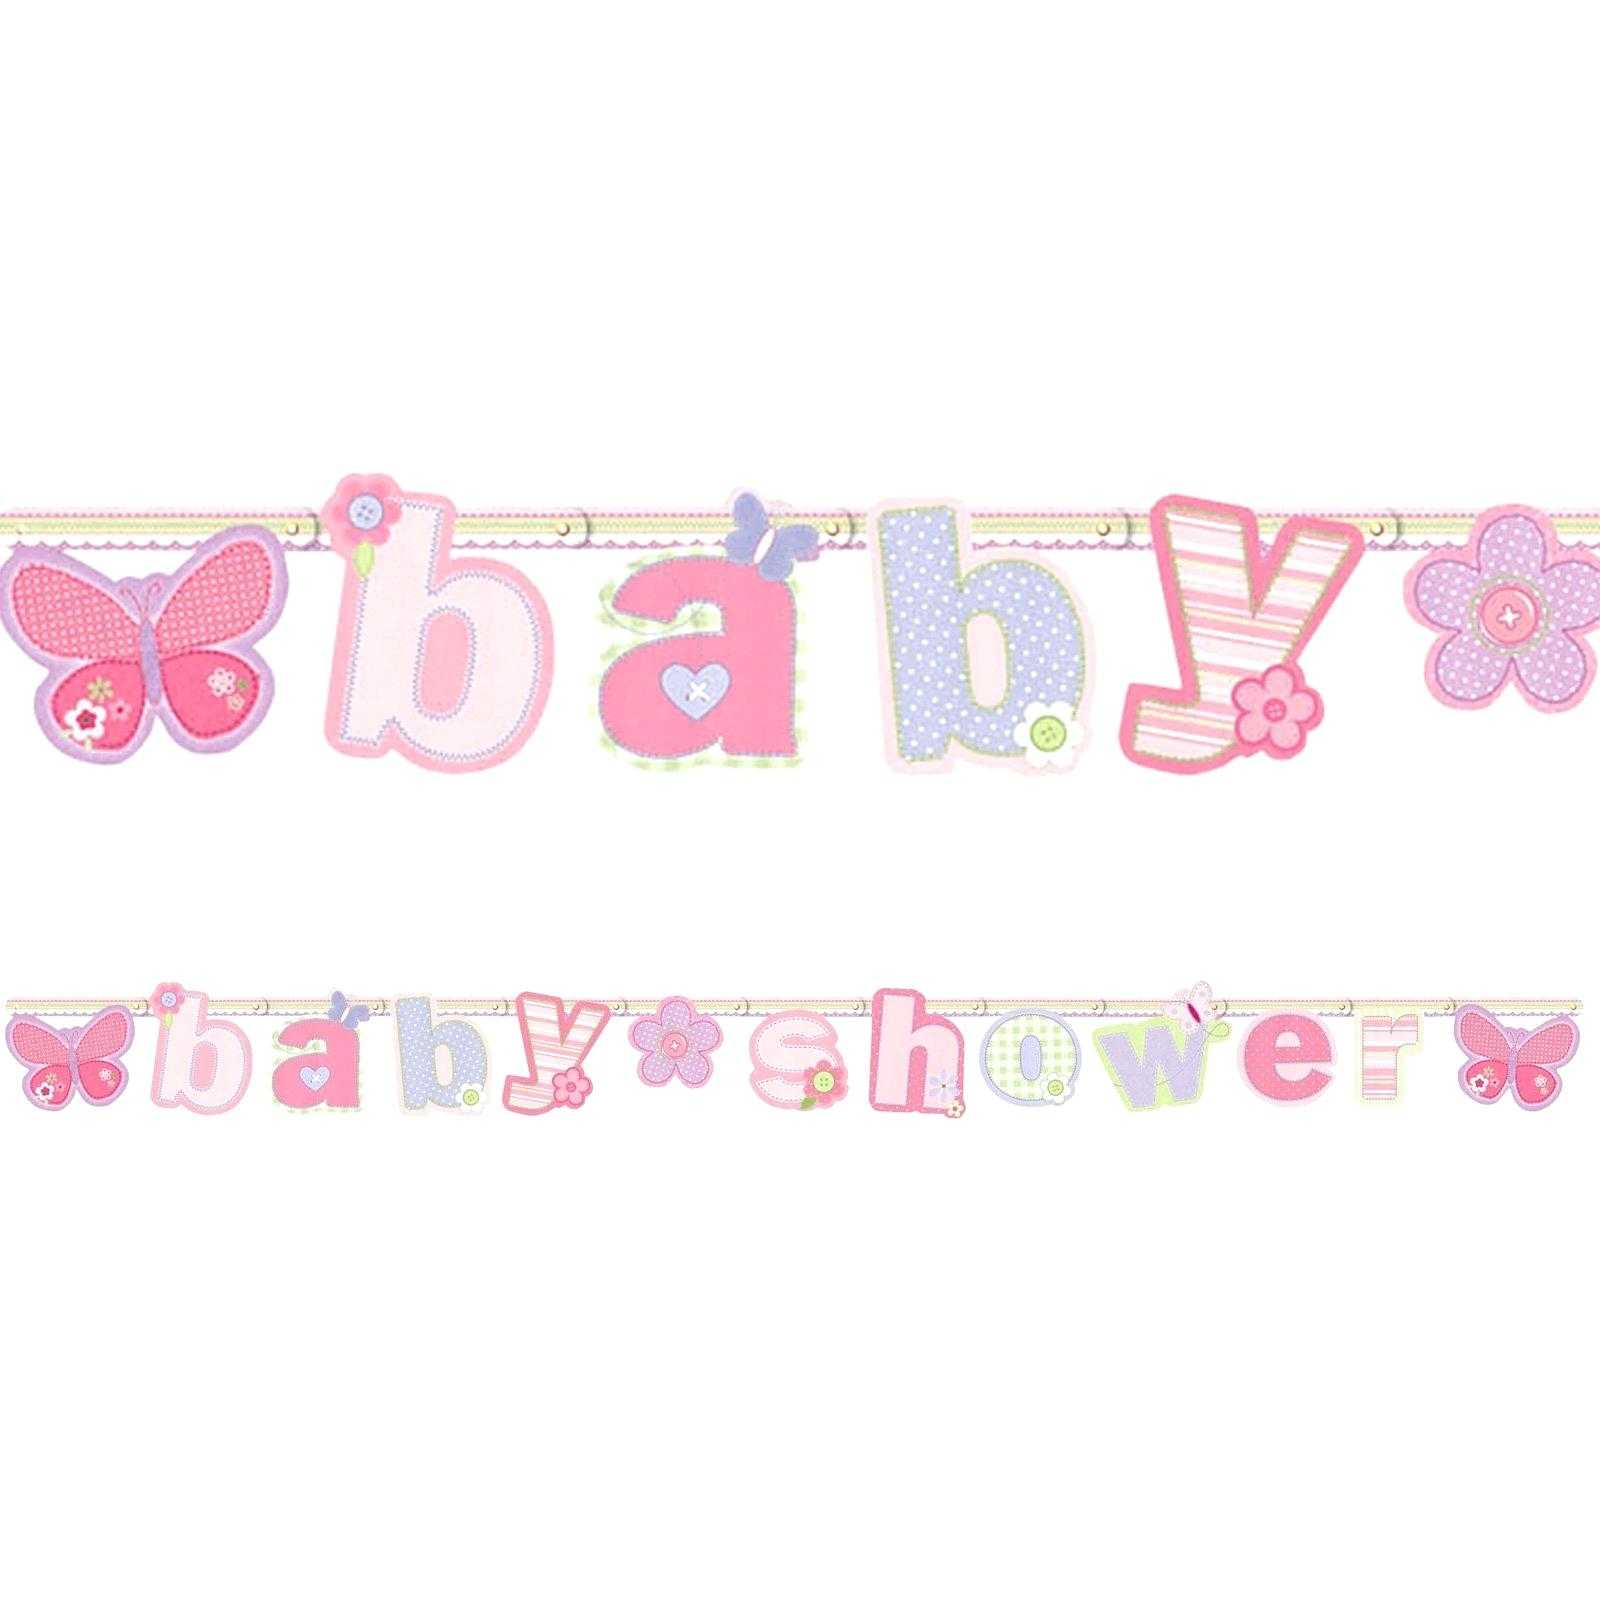 Baby Shower Banner Template Free | Handmade | Zblogowani With Regard To Free Bridal Shower Banner Template